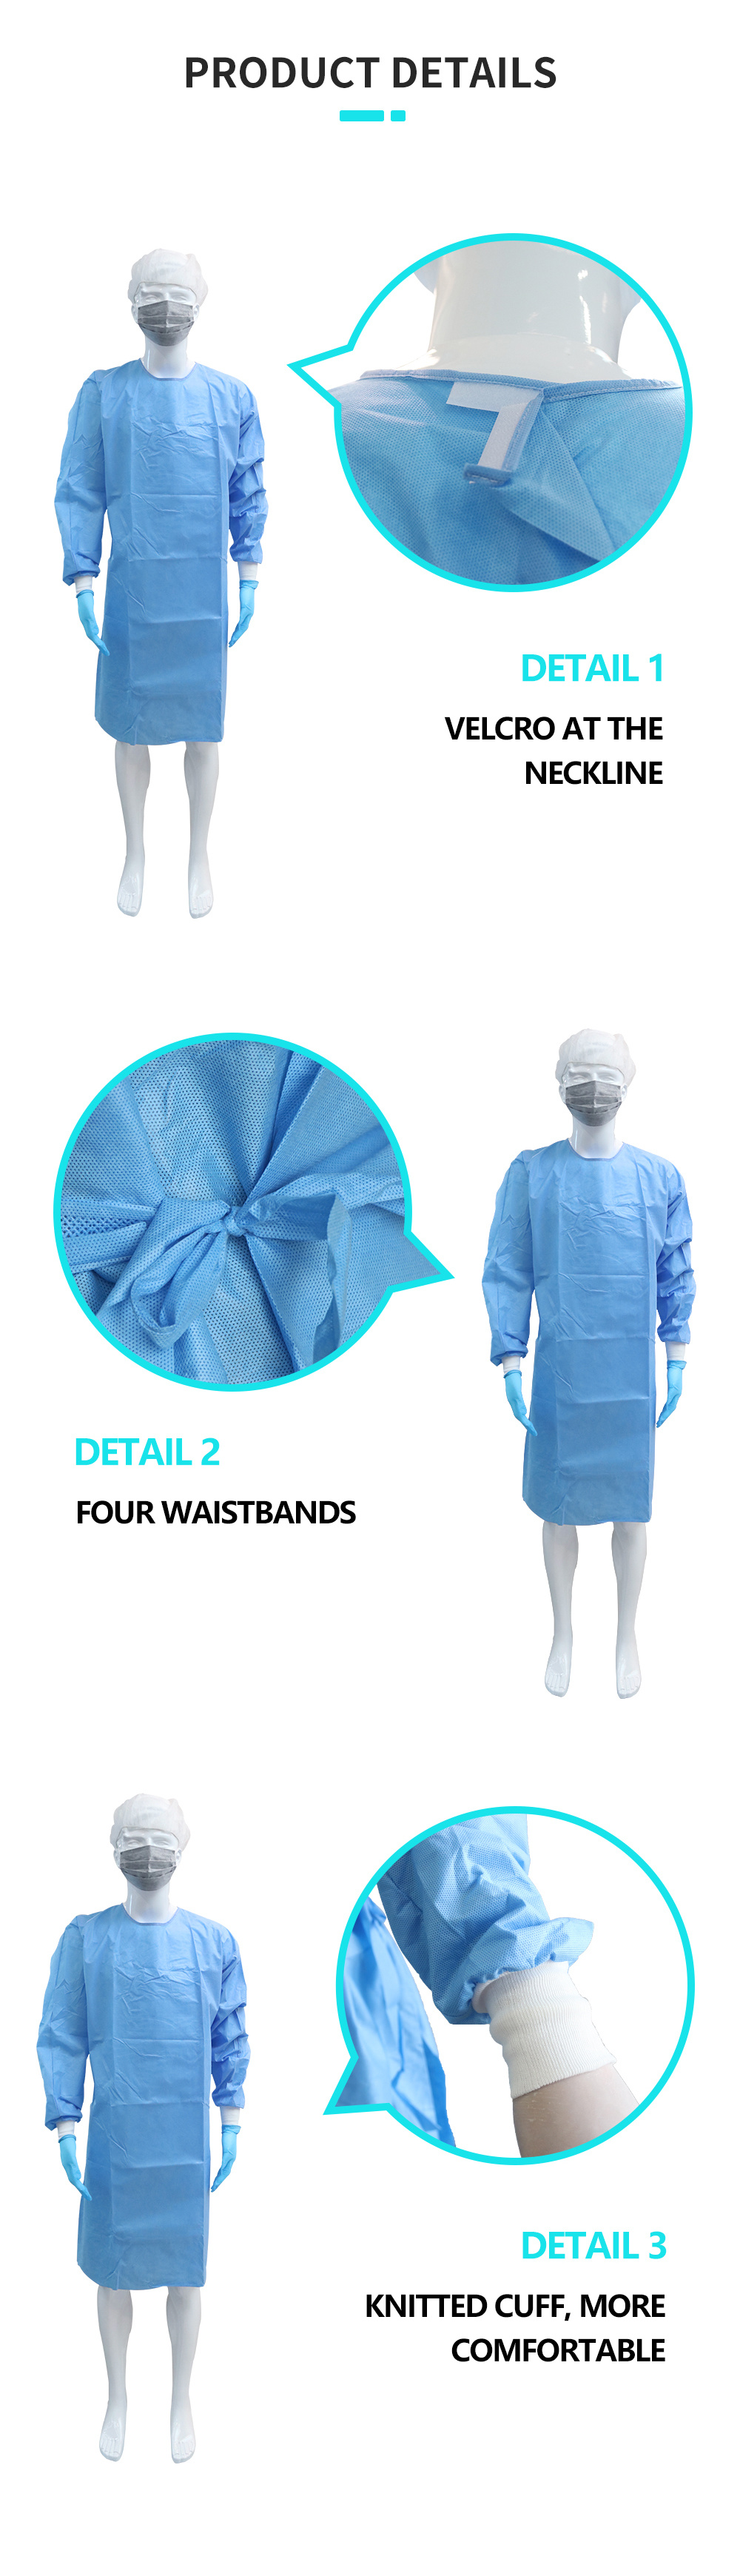 Medical Protective Non-Woven Surgical Medical Disposable Gown